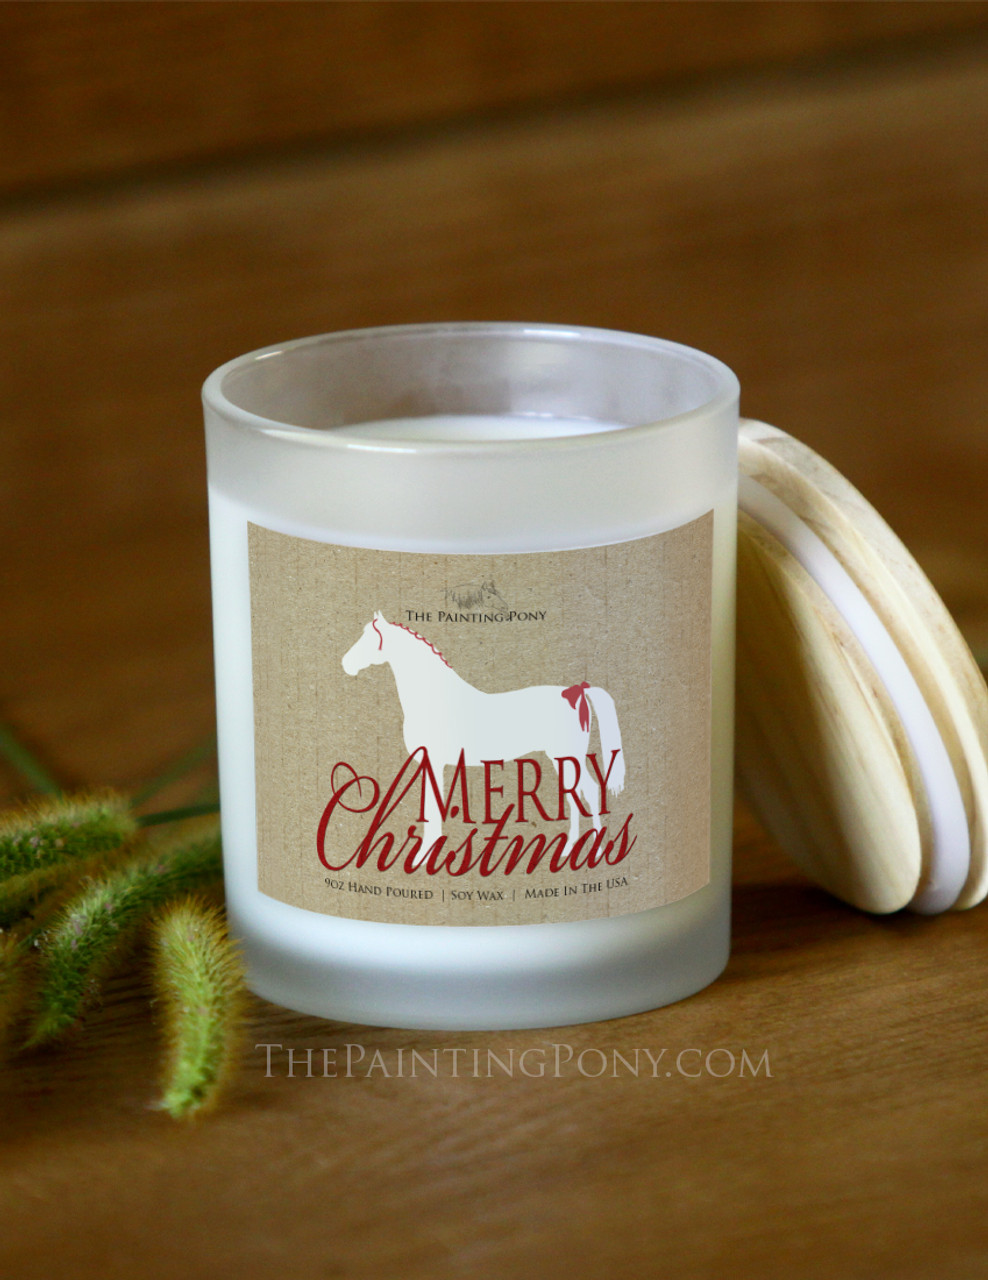 https://cdn11.bigcommerce.com/s-dthur0g/images/stencil/1280x1280/products/3667/20932/White_Christmas_Horse_soy_jar_candle_11oz__43528.1694020593.jpg?c=2